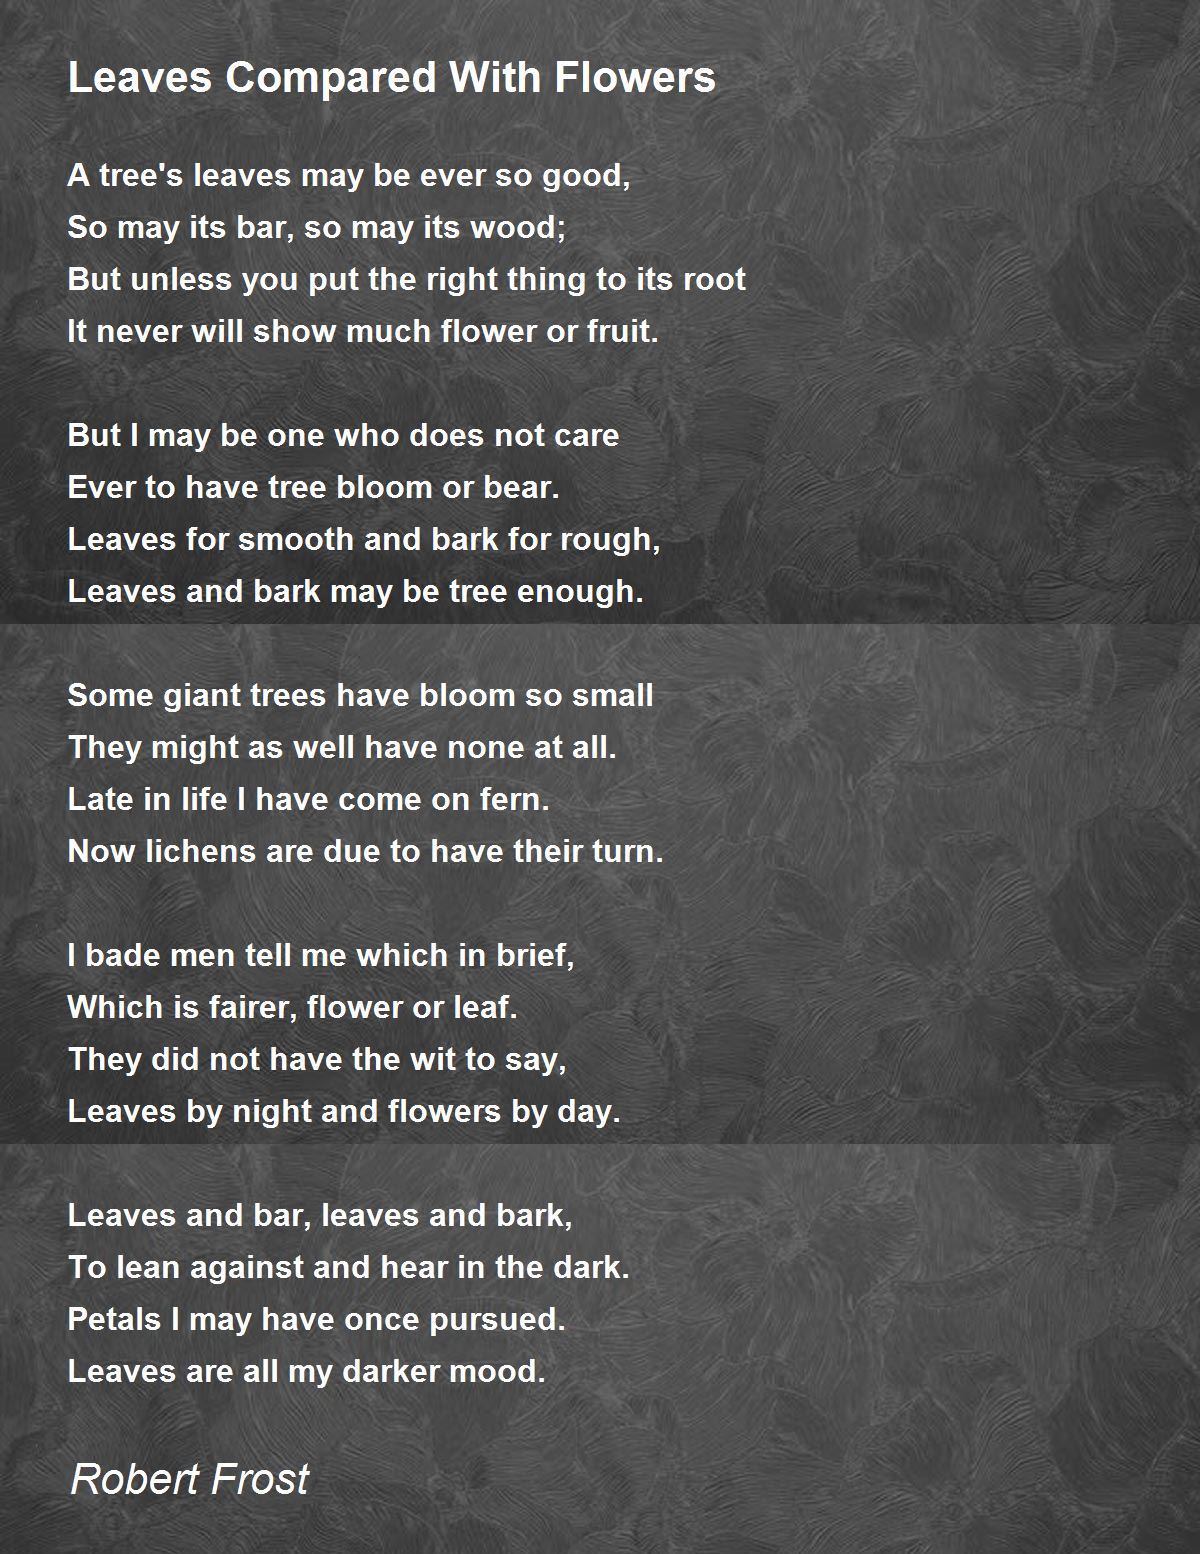 Leaves Compared With Flowers Poem by Robert Frost - Poem ...